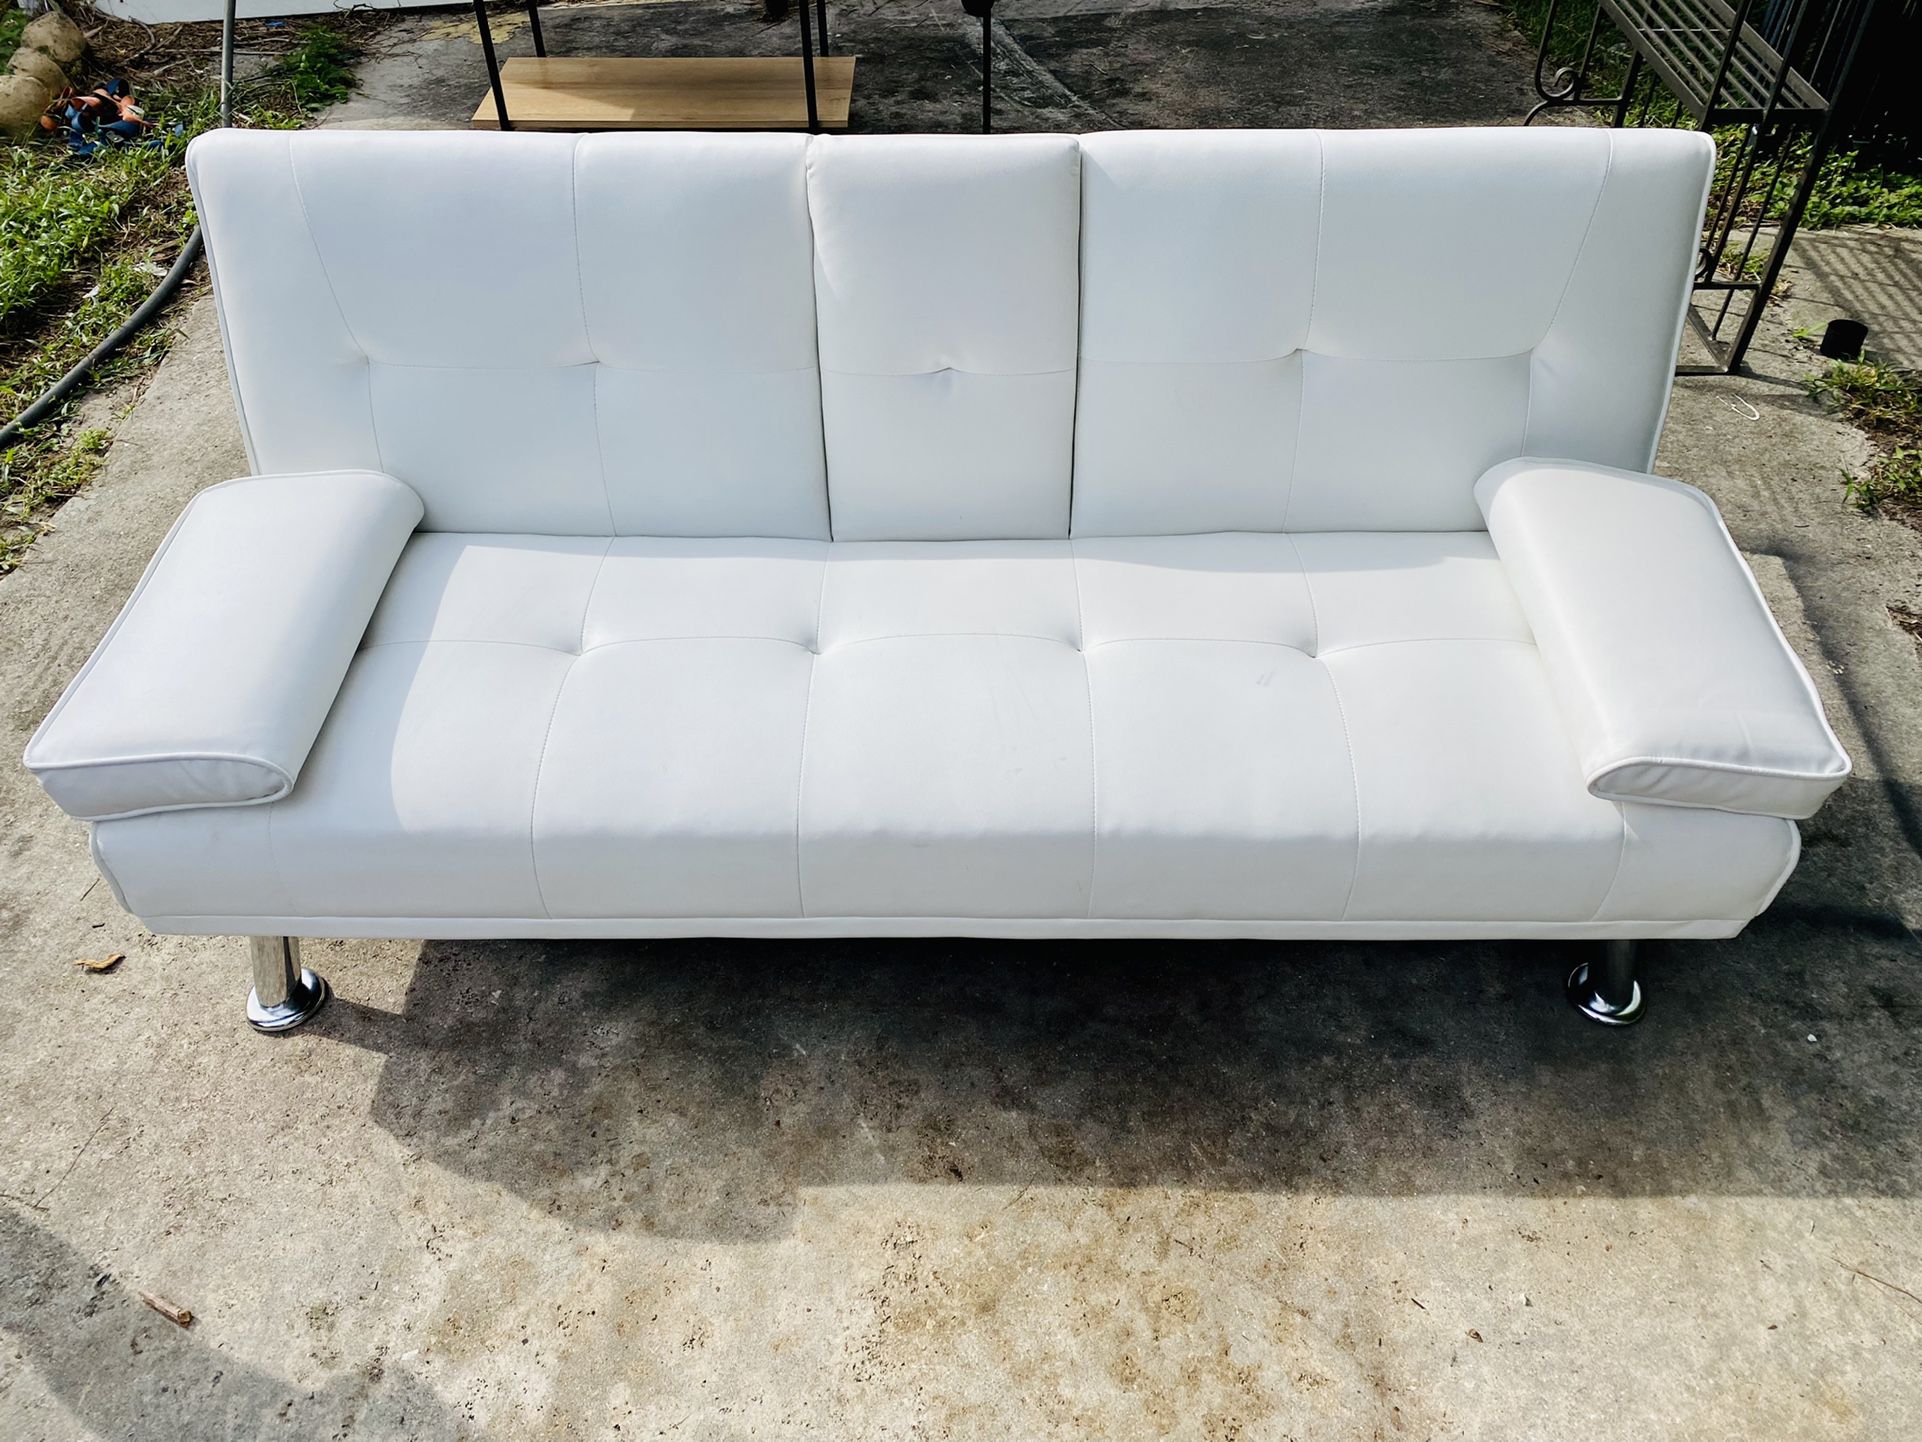 Beatiful White Leather Couch / Day Bed / Futon Very Modern And Comfy PAID $650